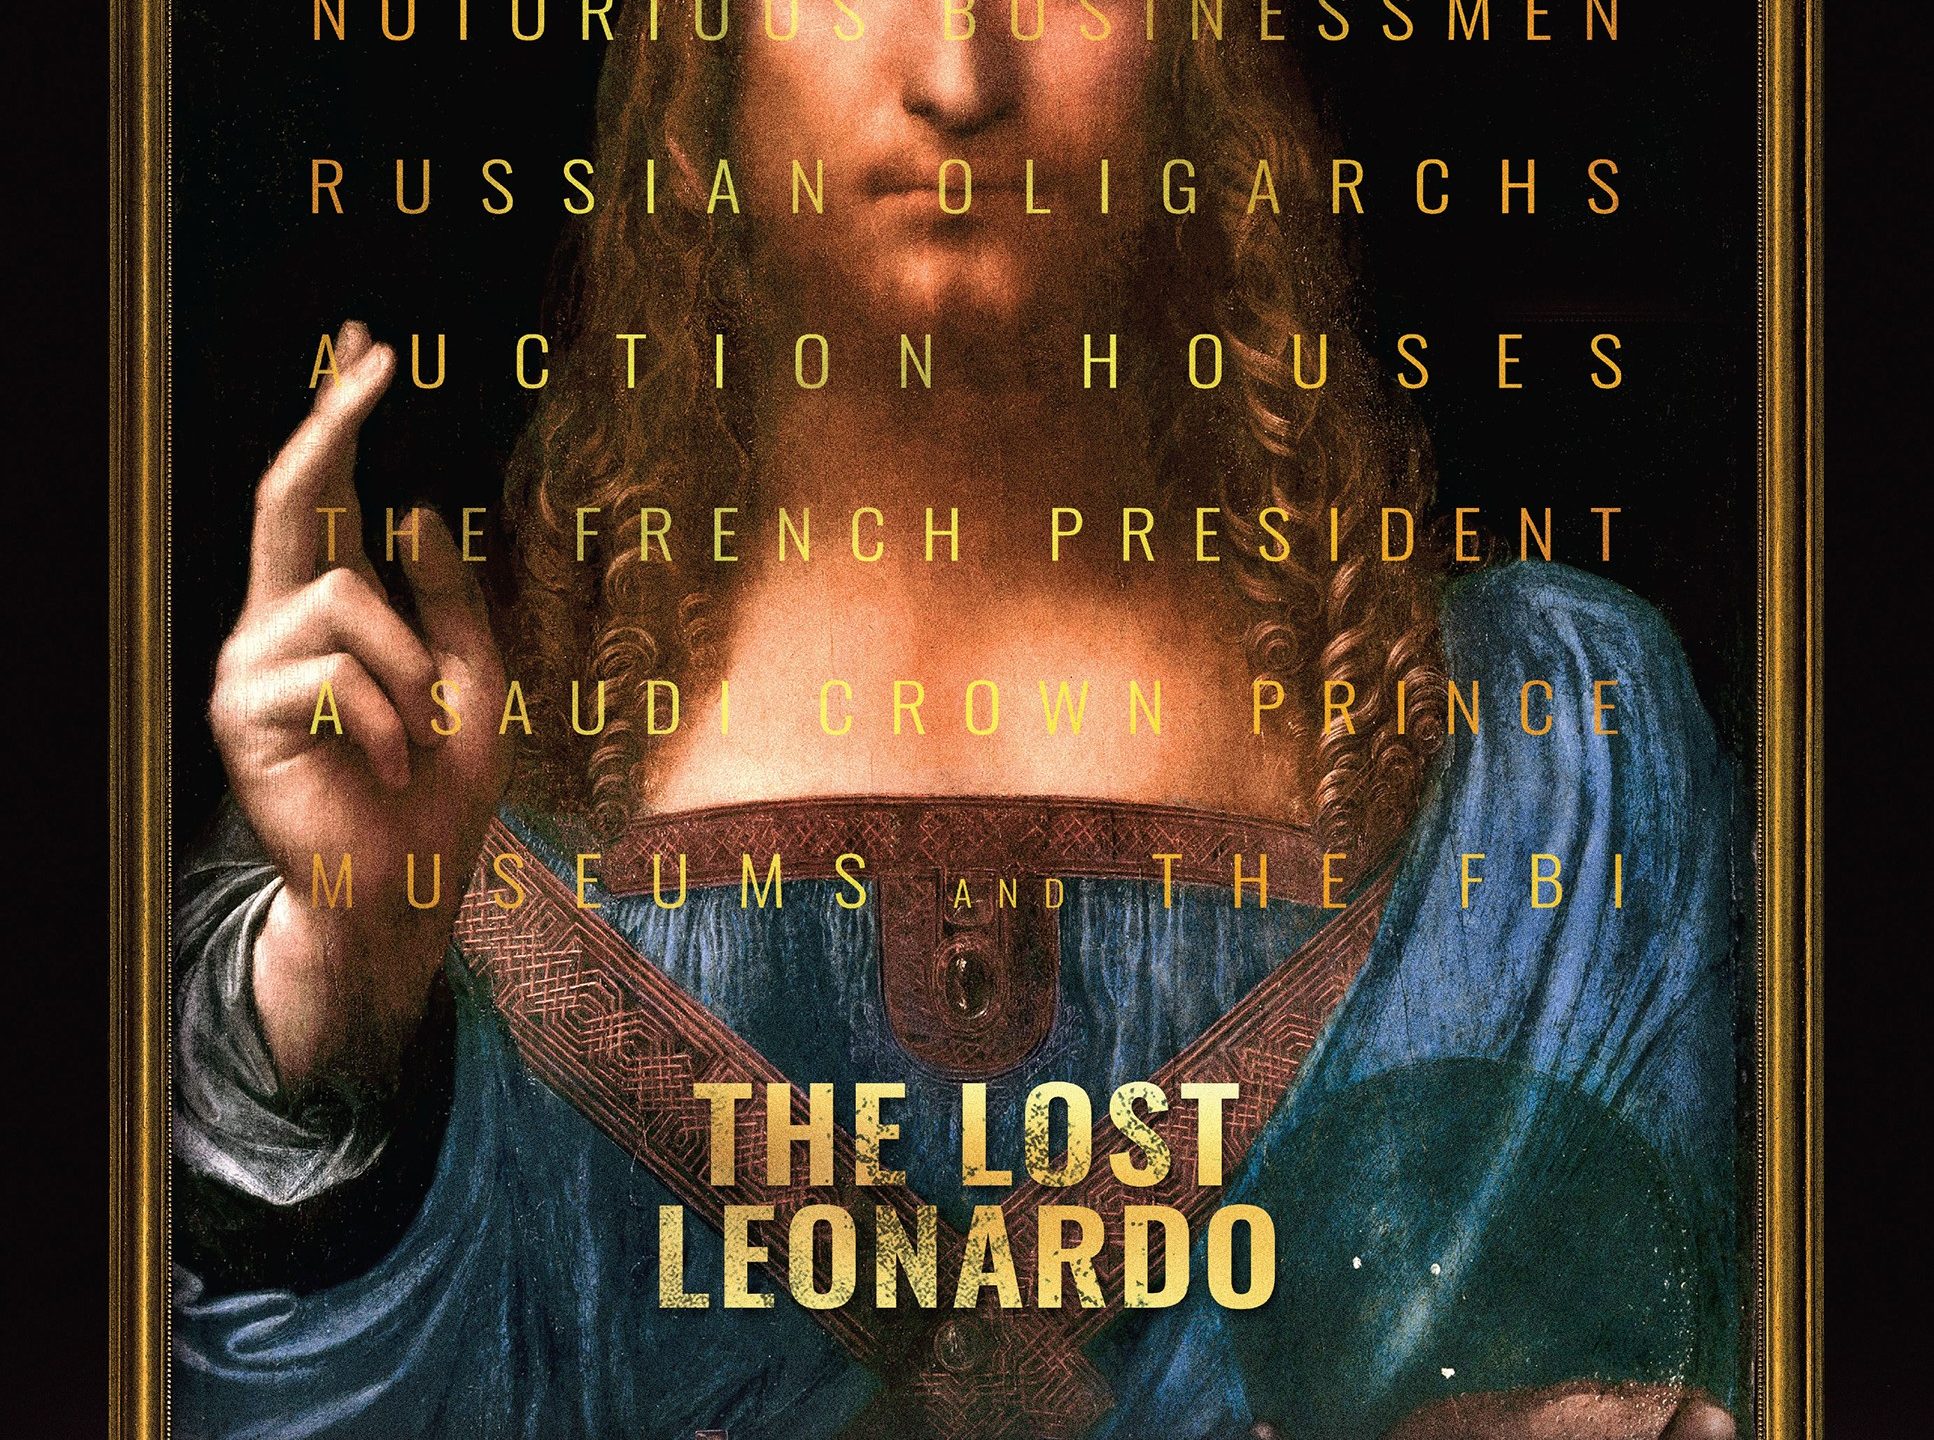 The Lost Leonardo * Fascinating Story With Insight Into The Economics And Politics Of The Art World